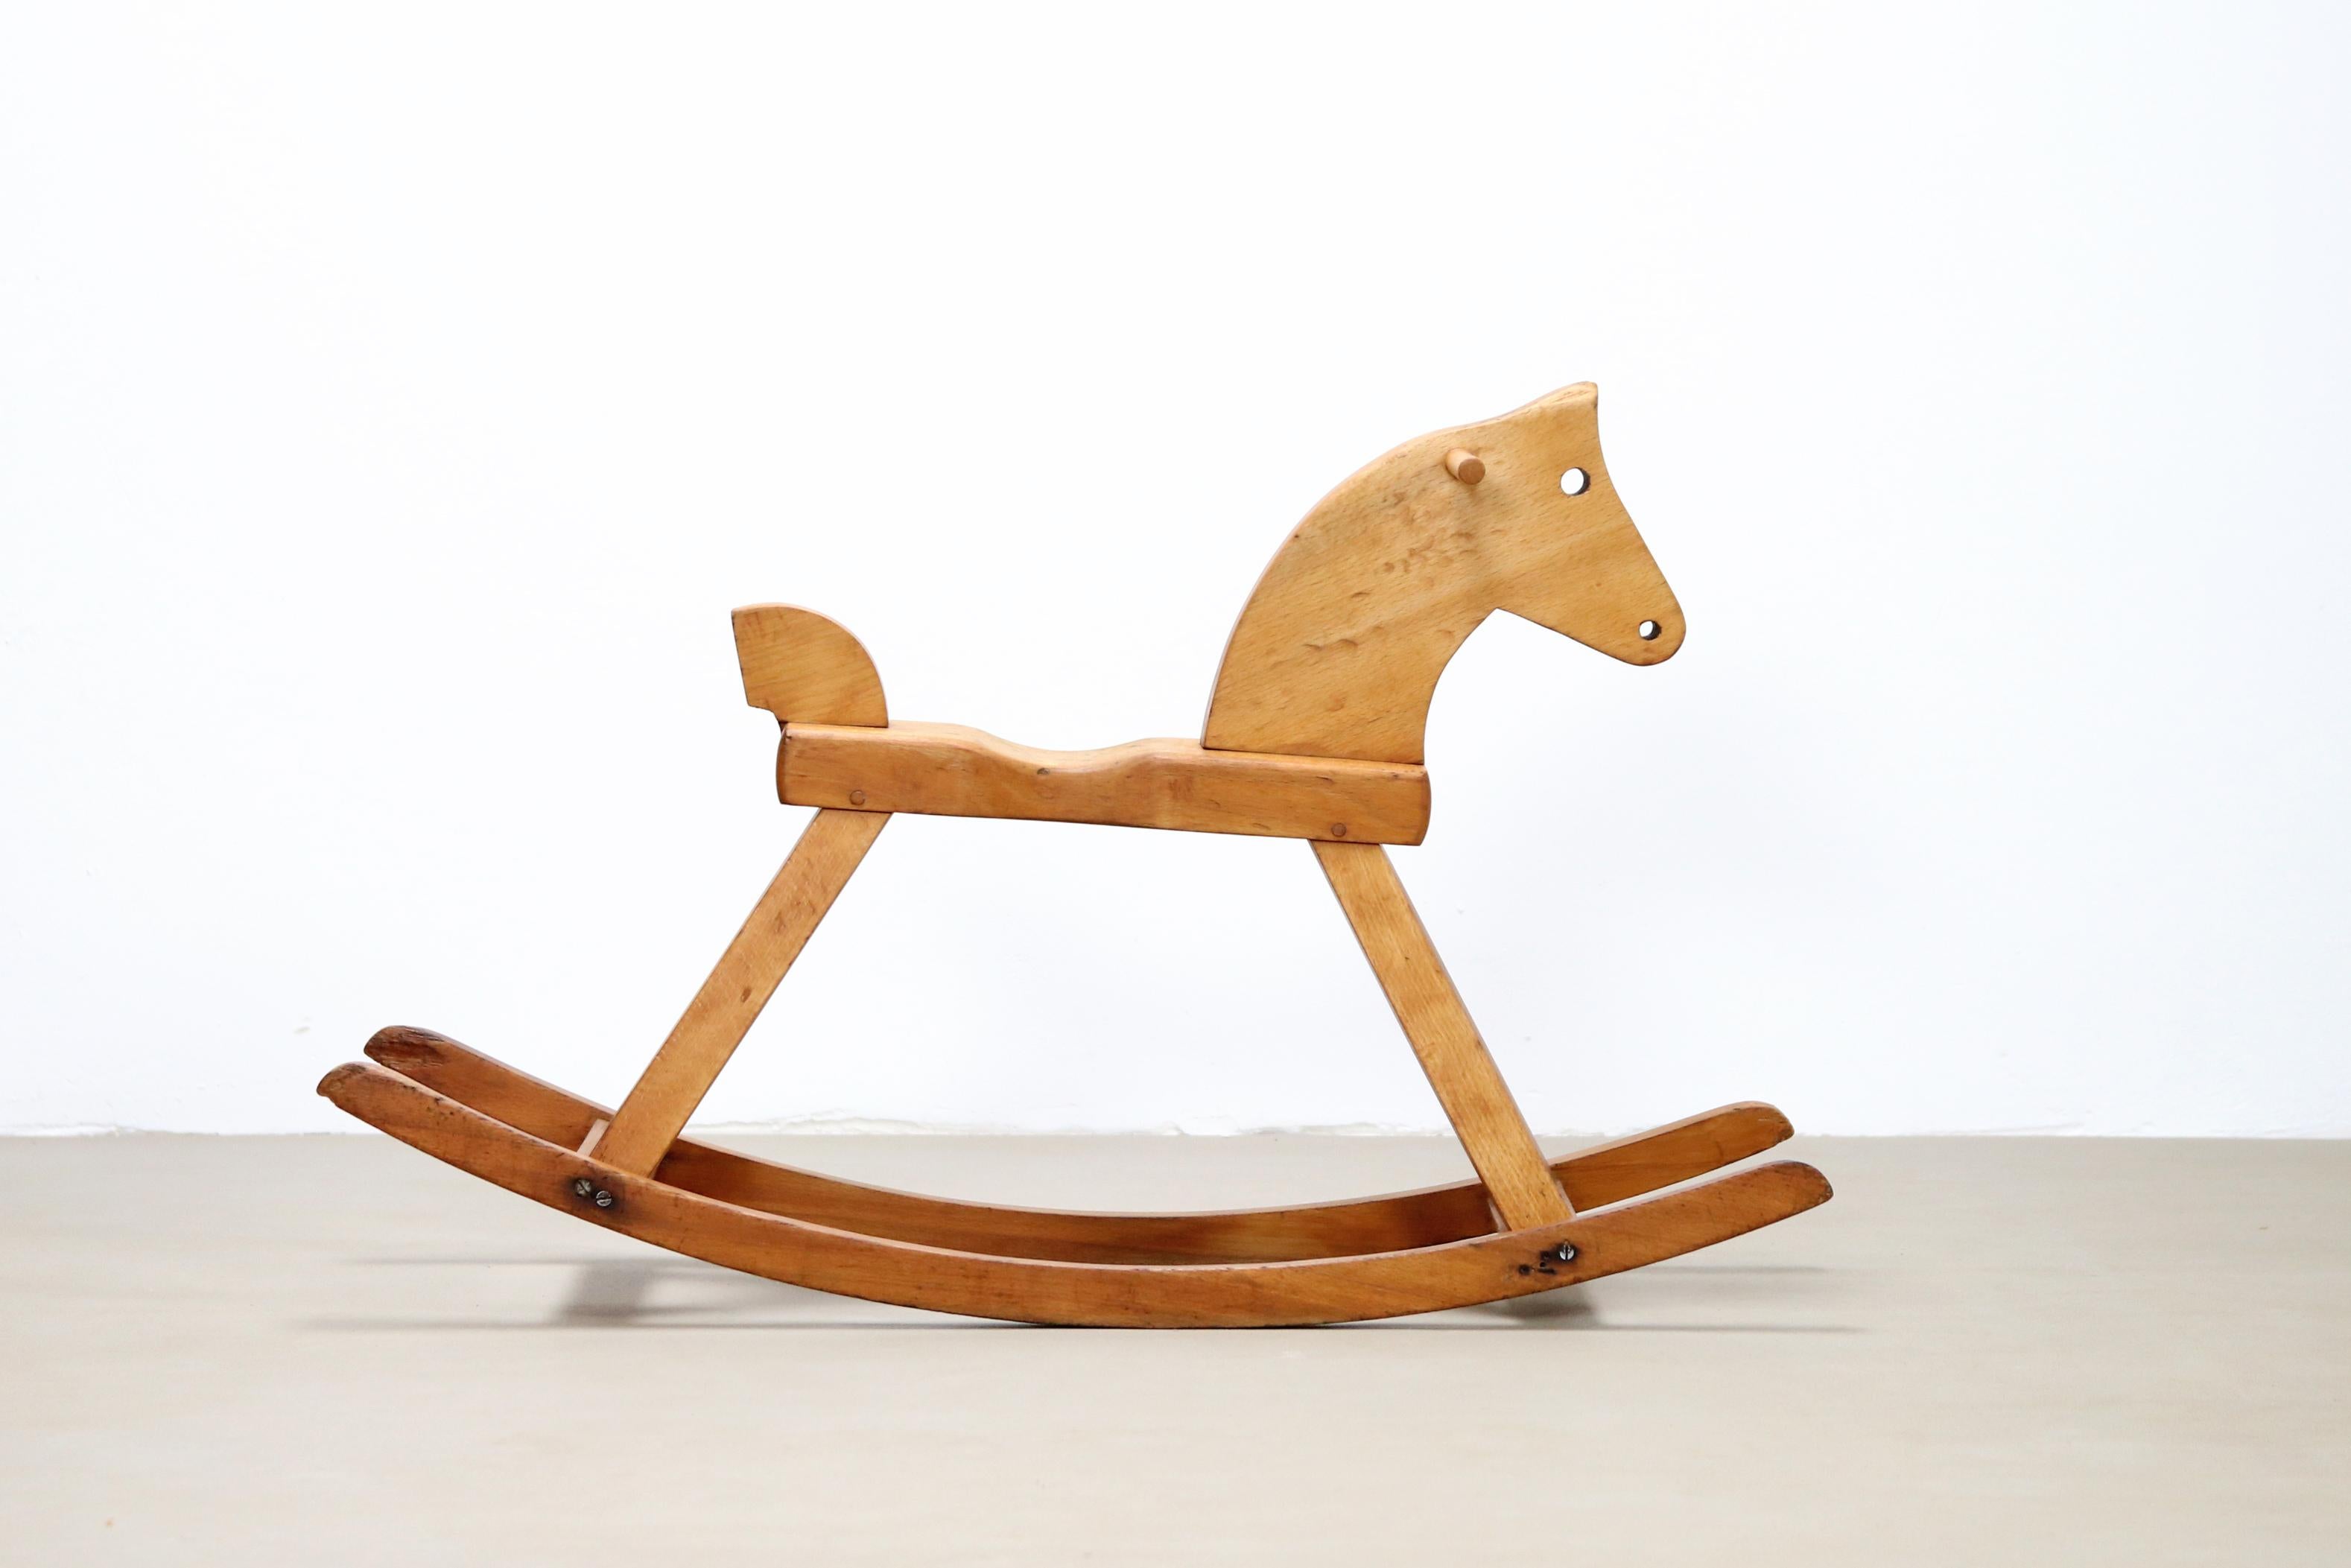 Officially children's toys, but an art object in itself. 
This very beautiful Kay Bojesen rocking horse is made of solid beechwood and marked by the manufacturer on its belly.
The horse was designed from 1936 and is design in a way that exactly